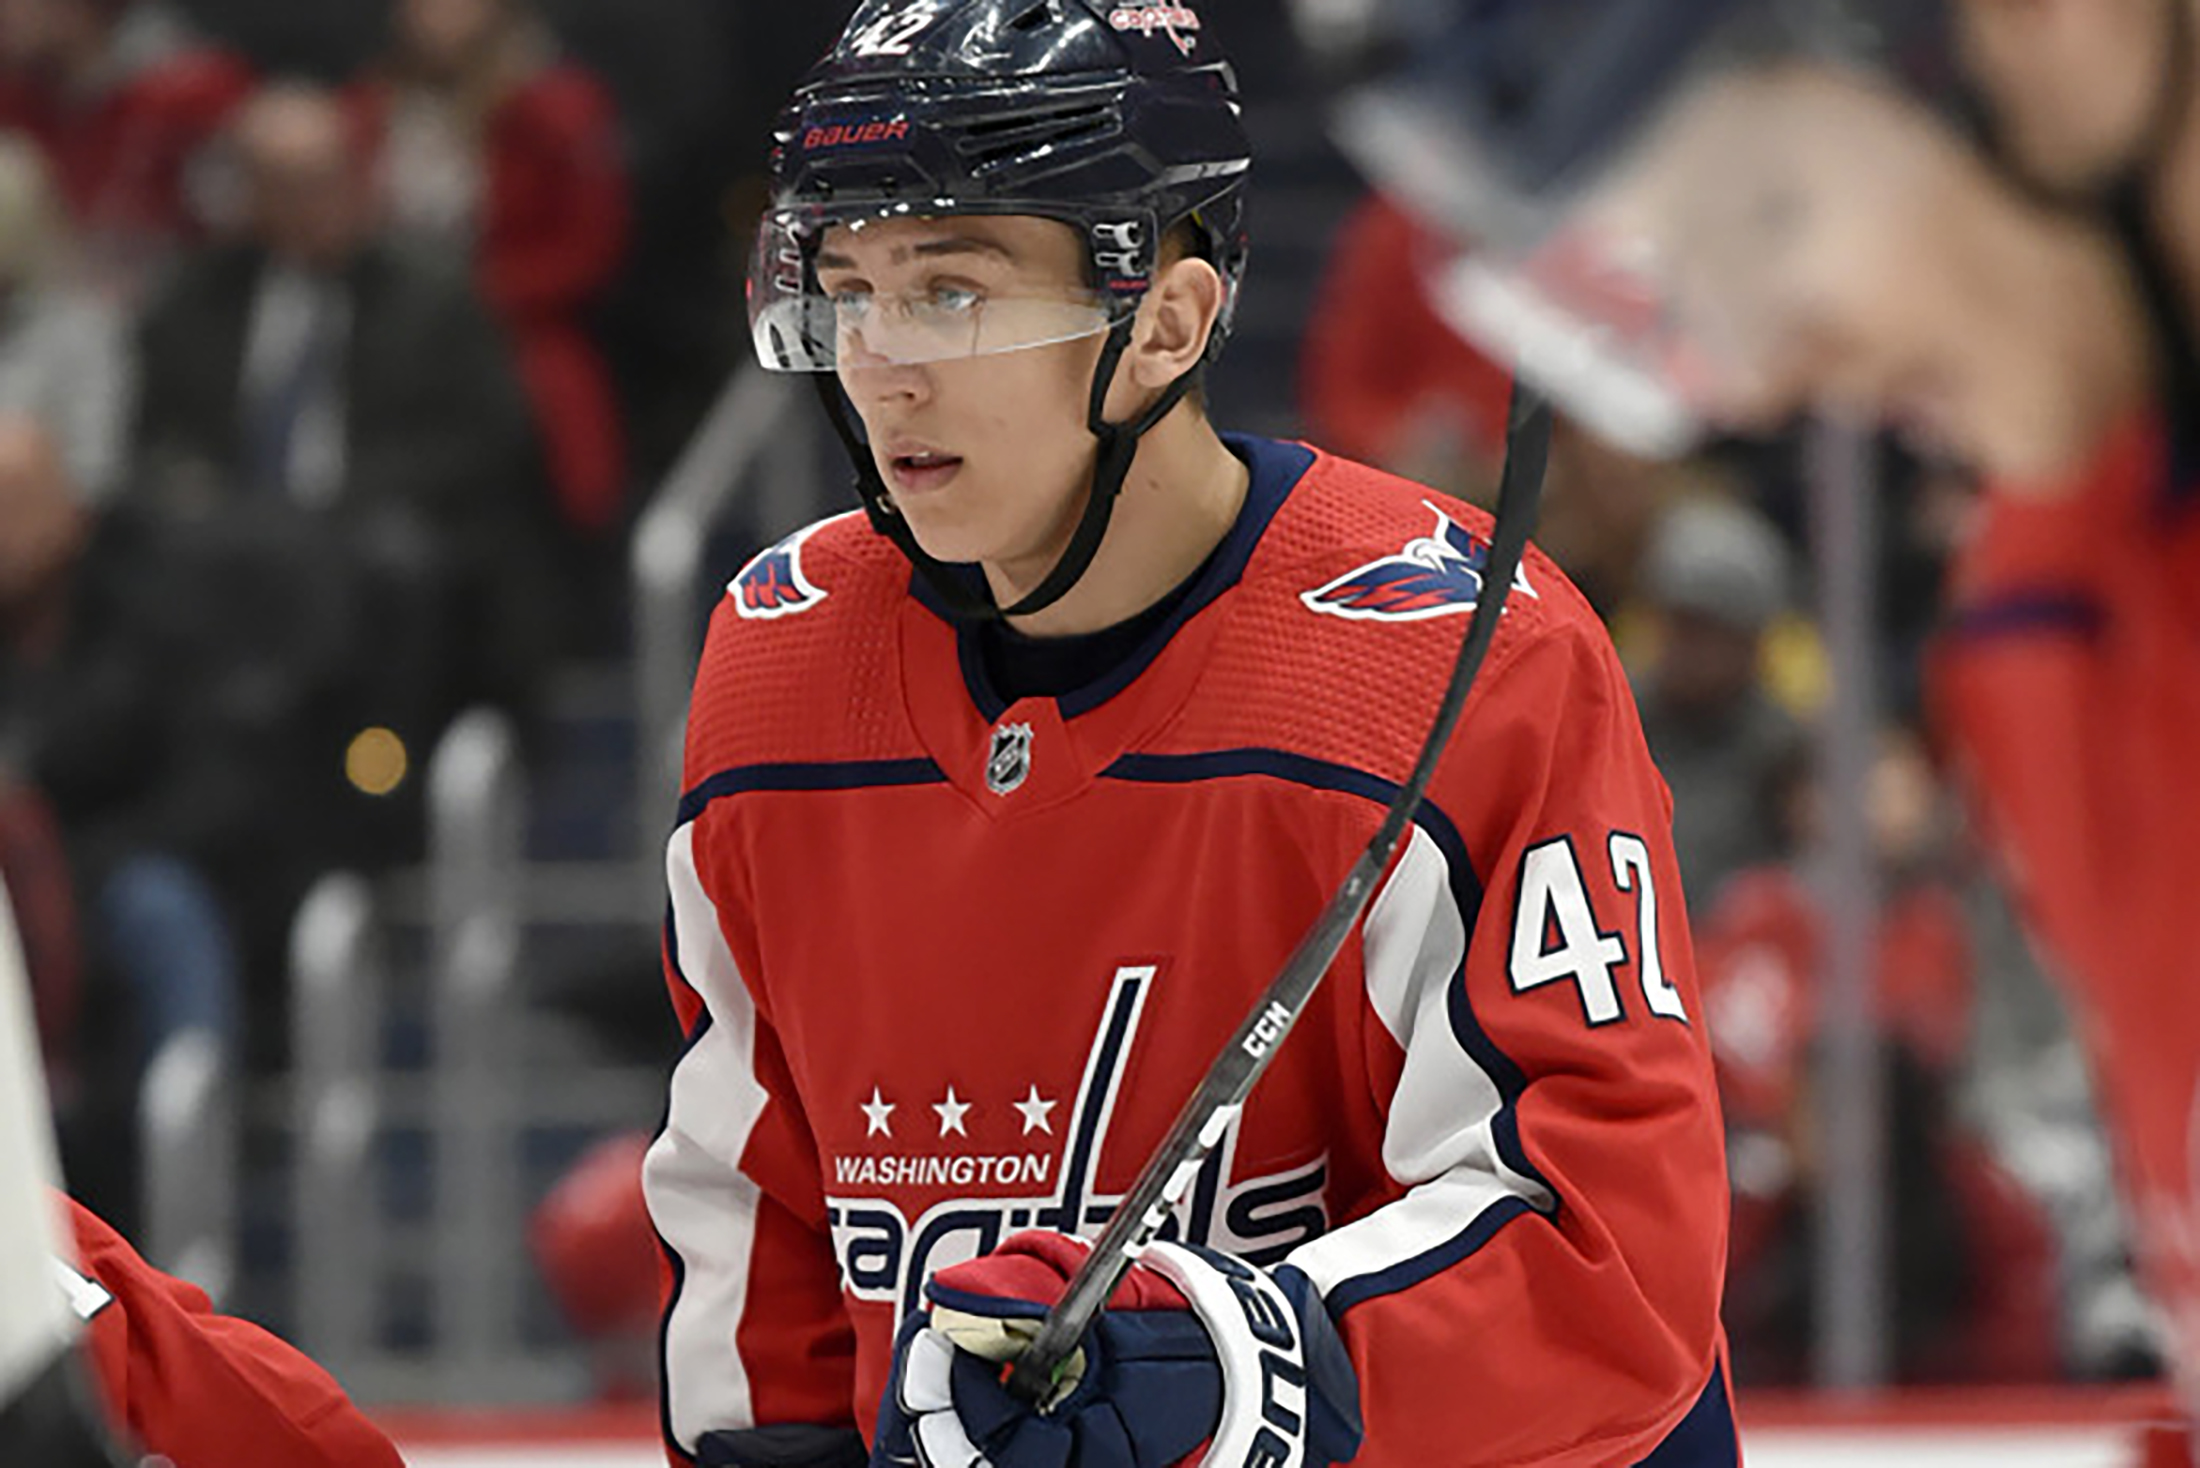 Capitals defenseman Martin Fehervary was among the standouts in the preseason opener.